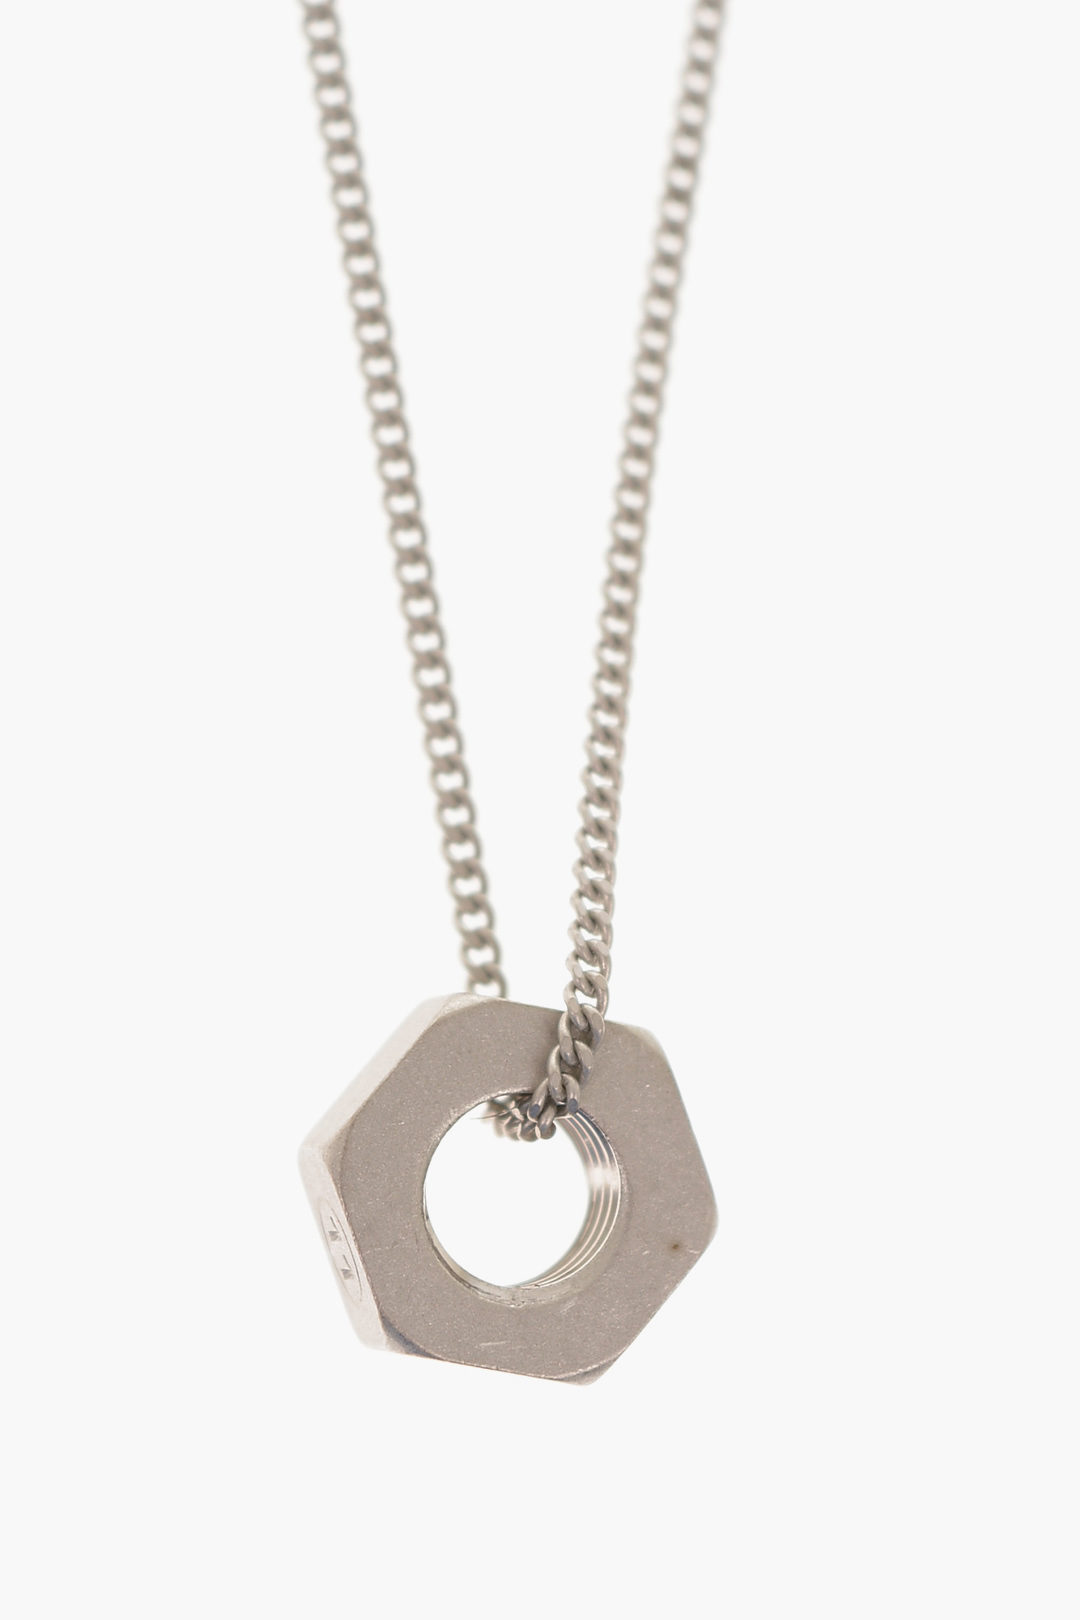 MAISON MARGIELA NUMERICAL NECKLACE - SILVER | Silver necklaces, French  luxury brands, Fine jewelry